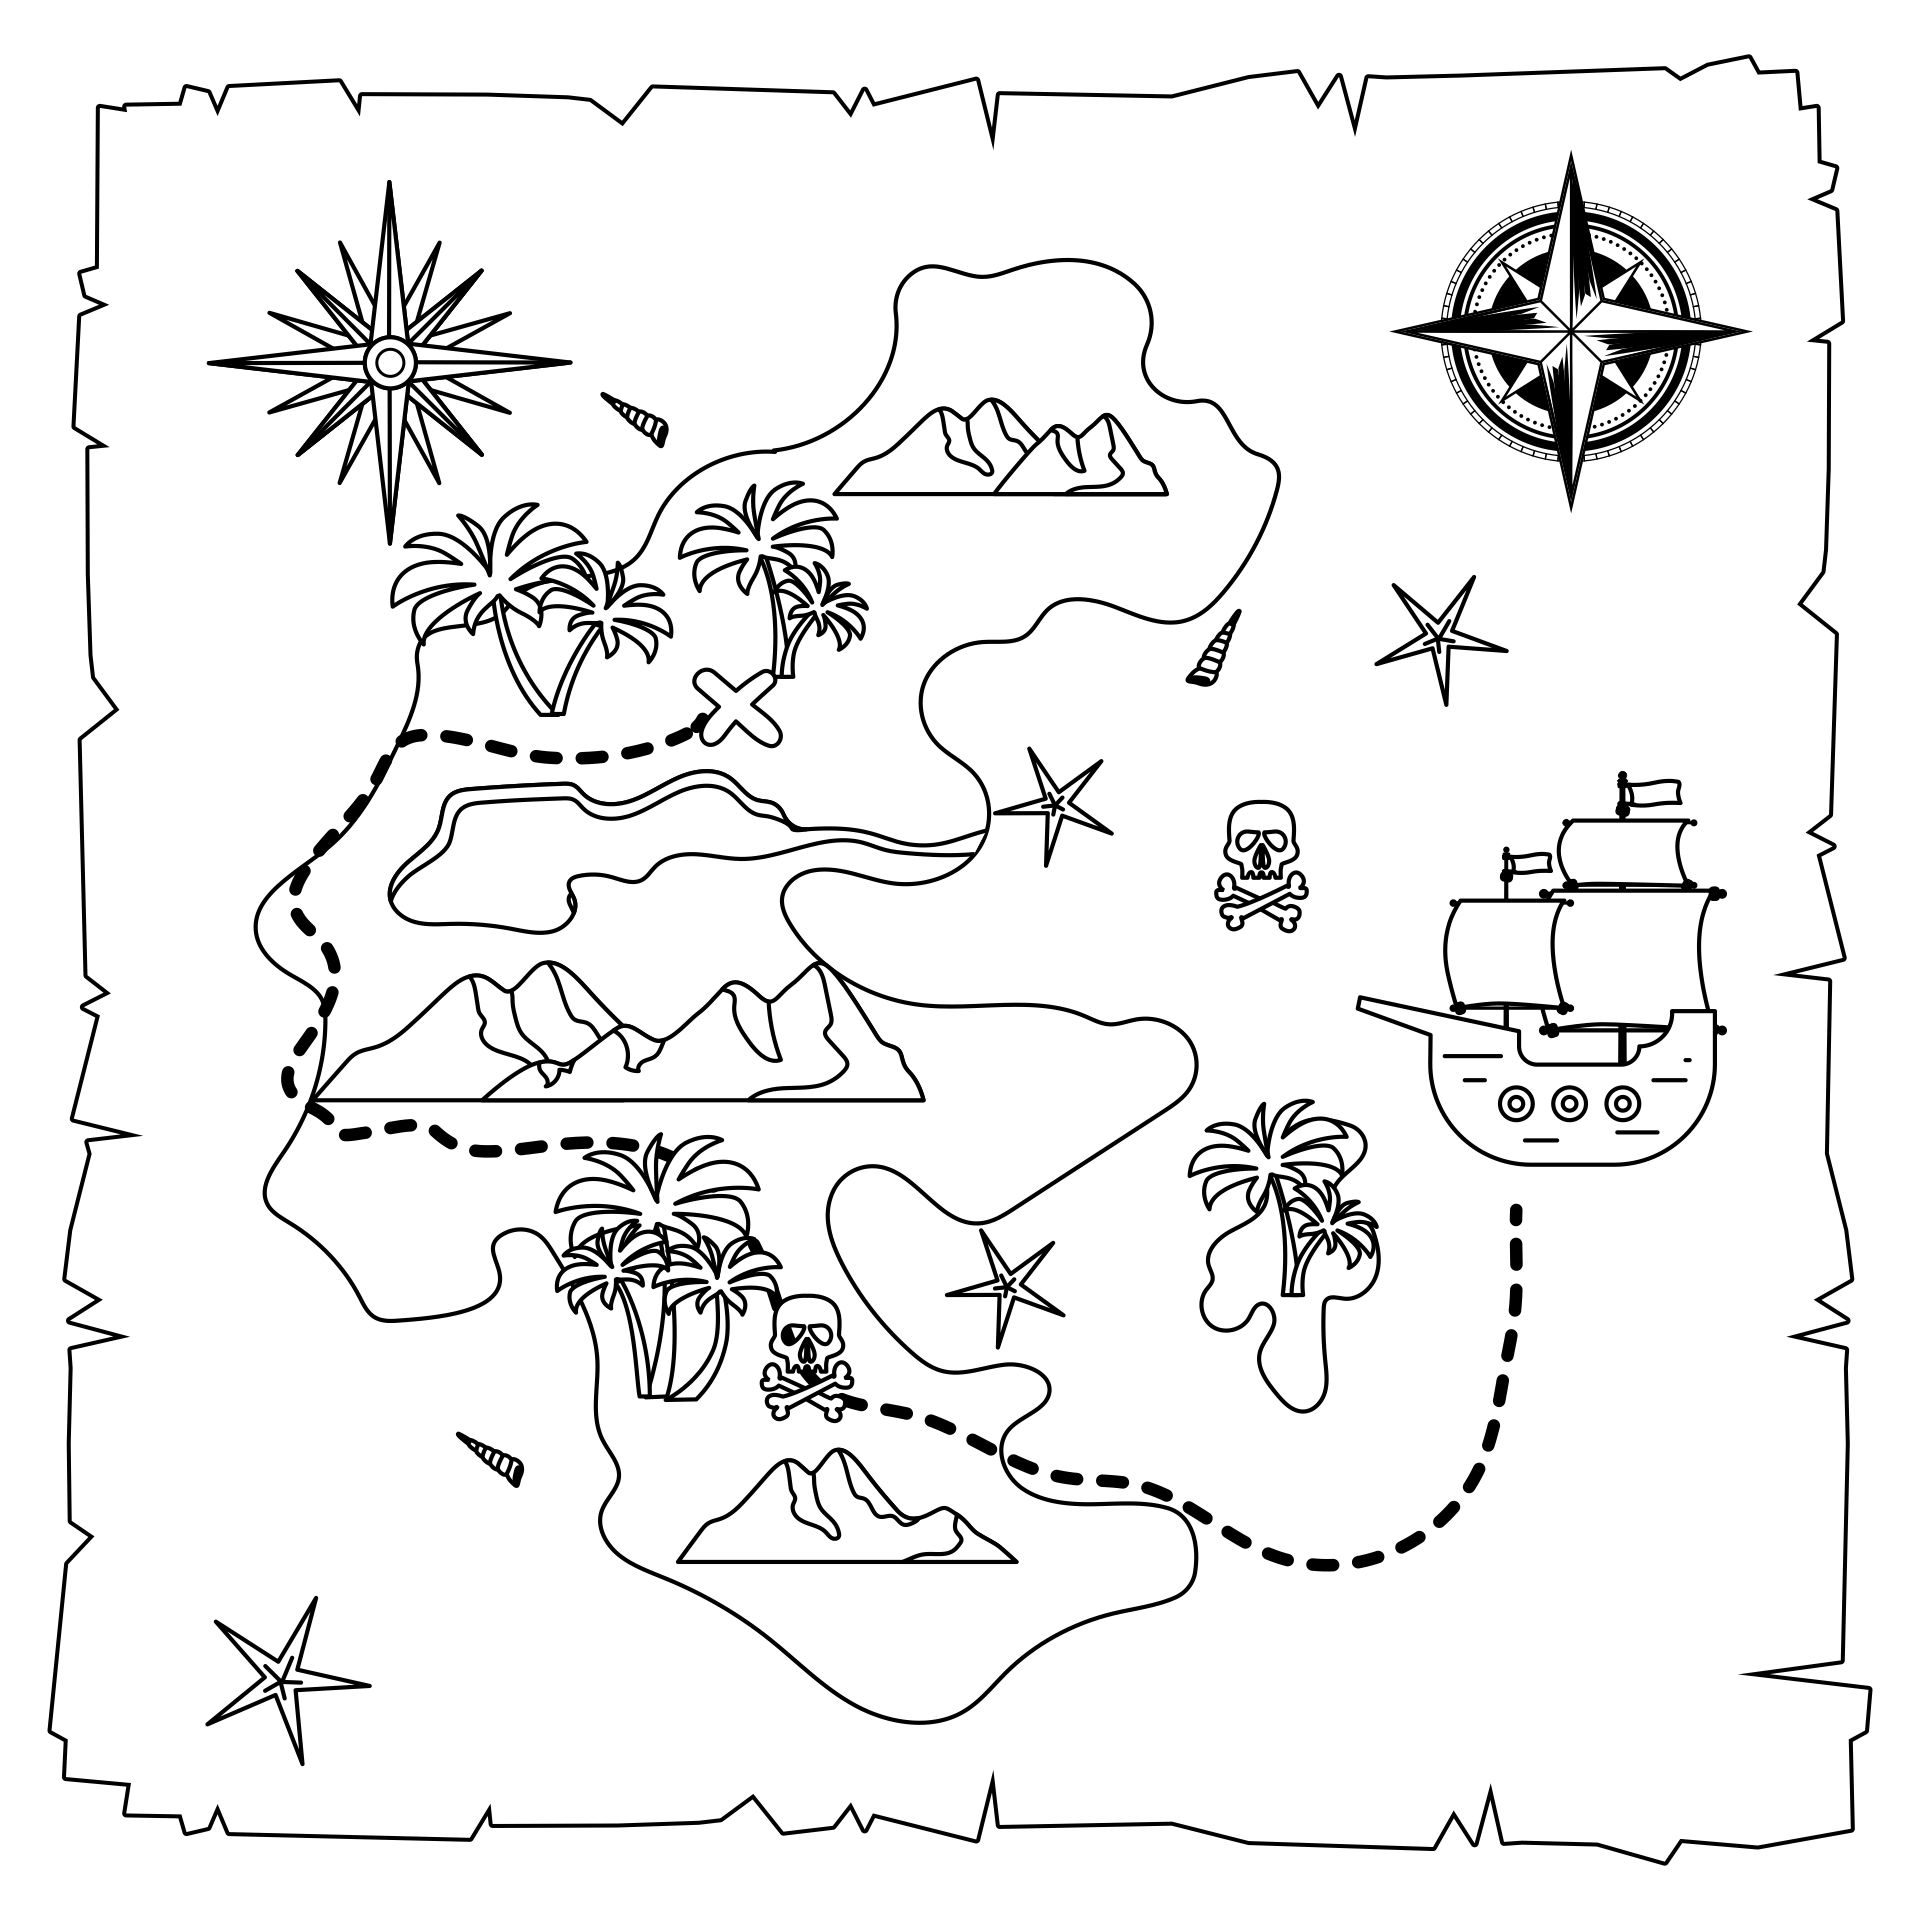 7 Best Images of Printable Pirate Map Template - Printable ...